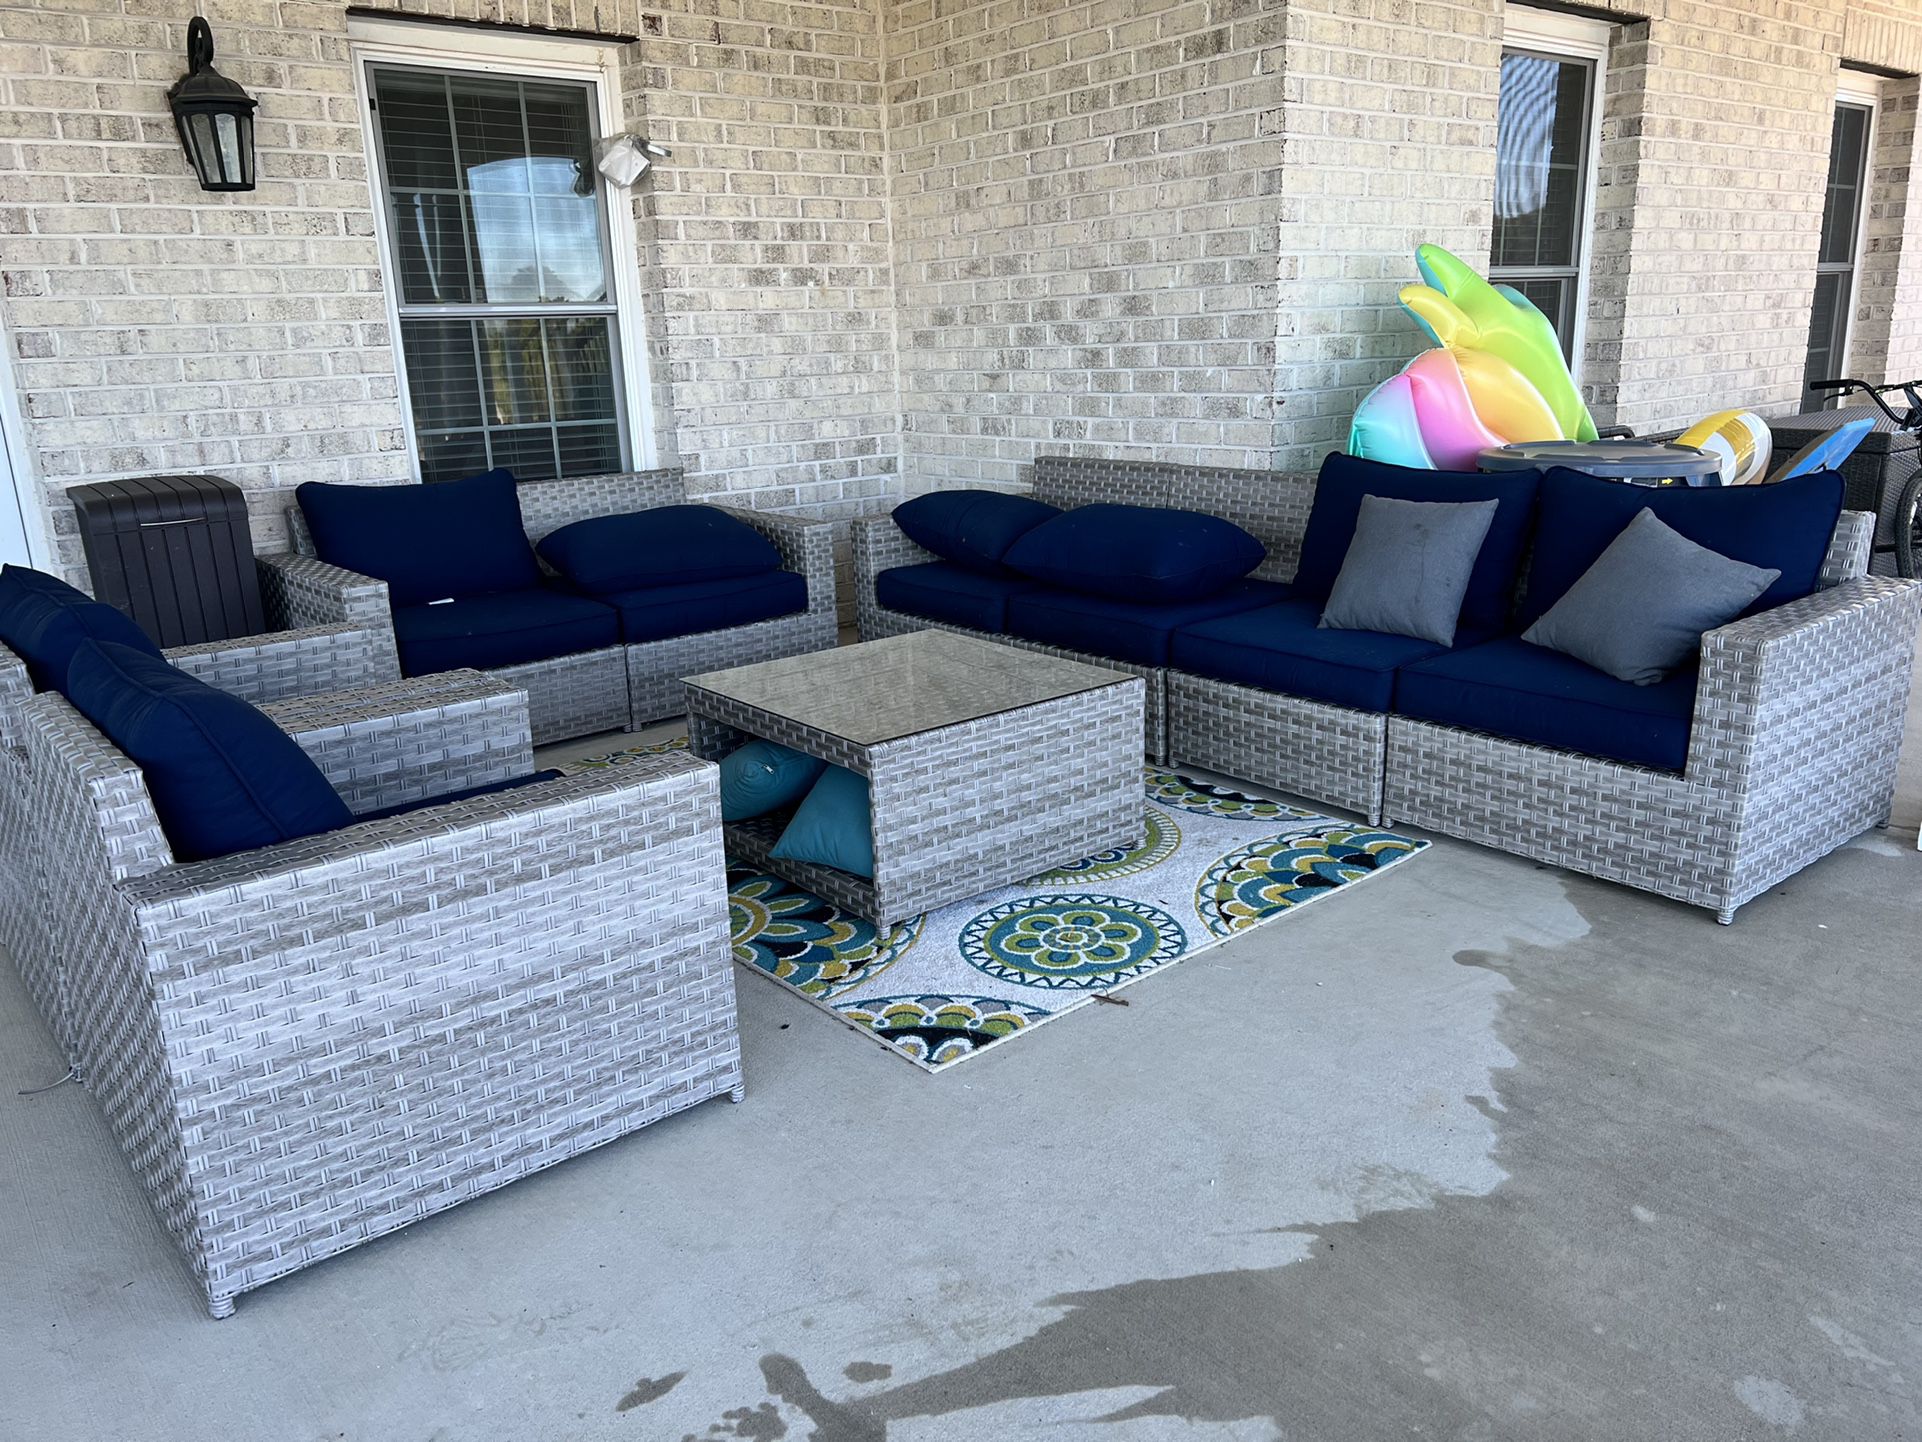 Patio Furniture  With Rugs  Over 4k New Only 2 Years Old  